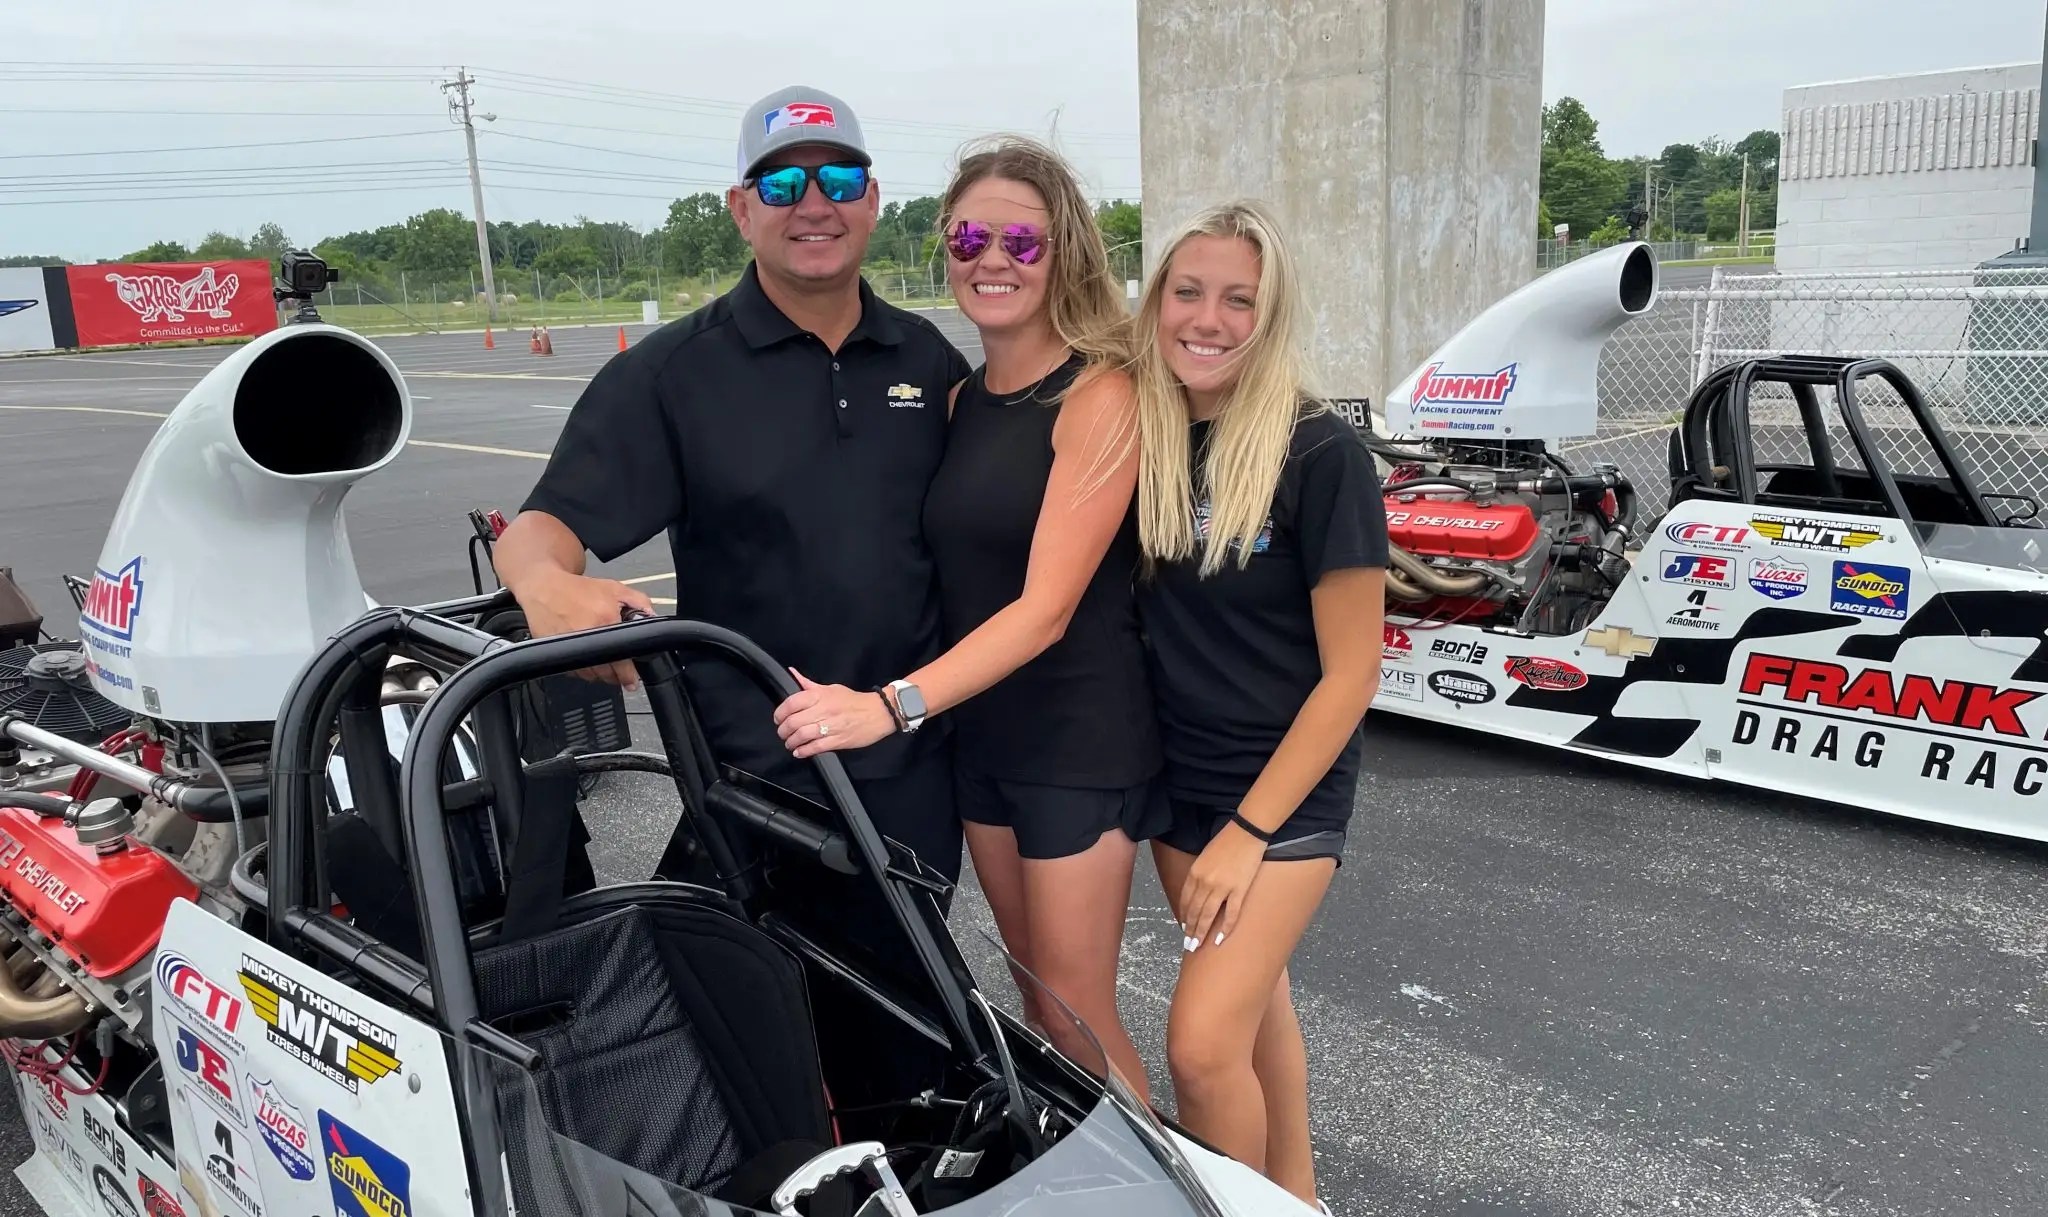 NHRA Champ Robert Hight’s Daughter, Autumn, Finishes Super Comp Course